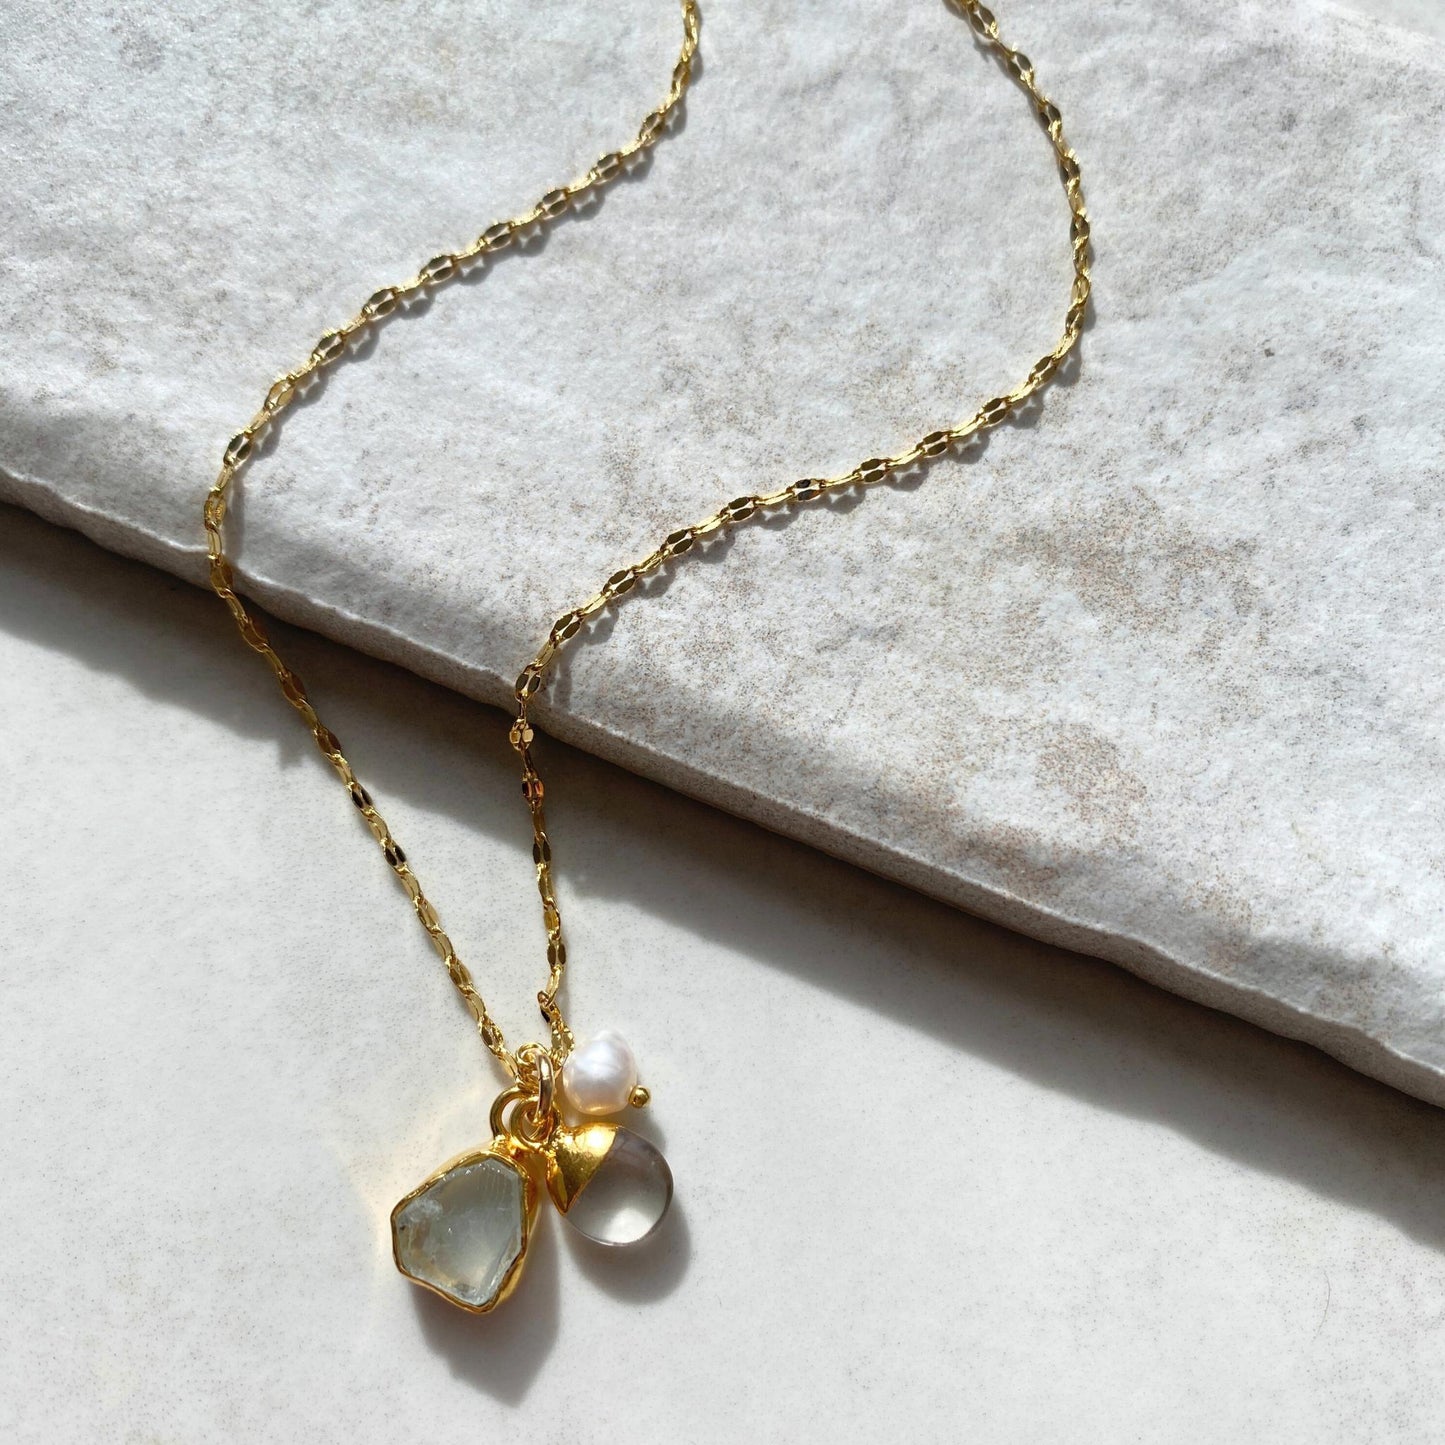 Aquamarine Carved Triple Necklace | Serenity, Healing, Calm (Gold Plated or Silver)